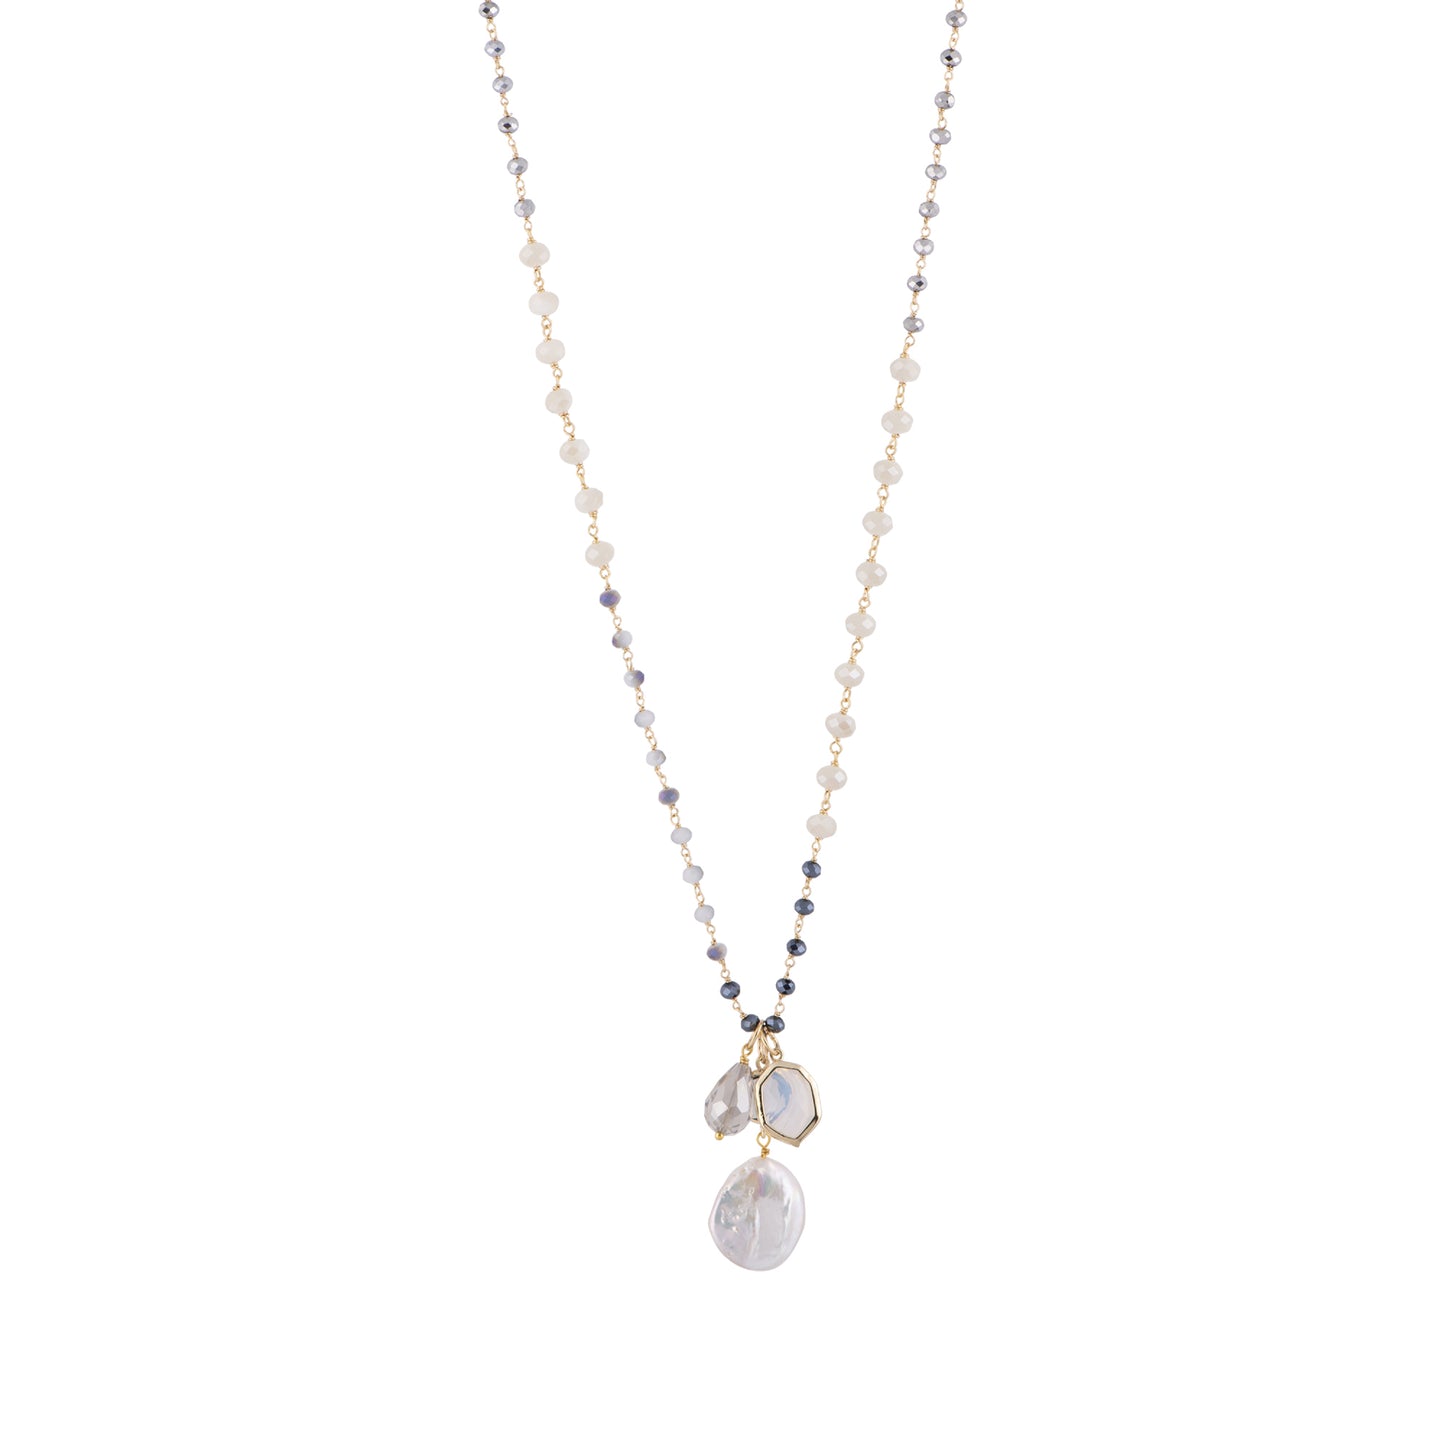 Nicole - Coin pearl rosary chain with hanging charms (Front)